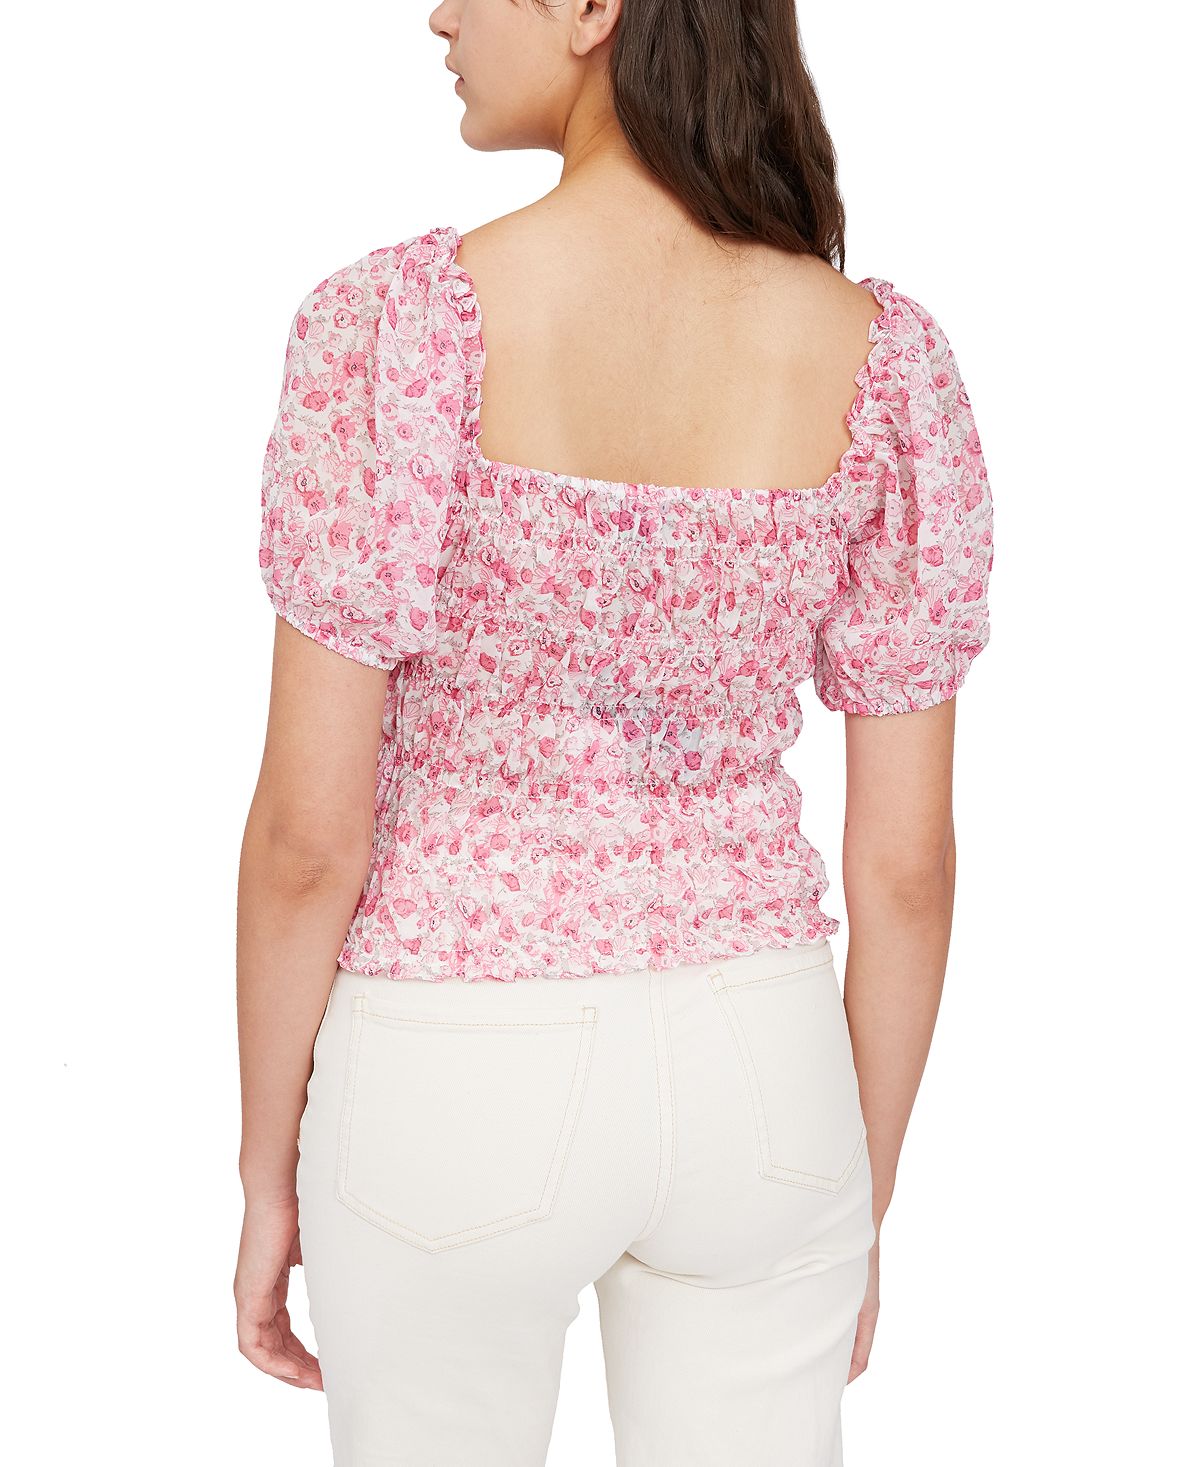 Lucy Paris Printed Smocked Square-neck Top Pink Floral